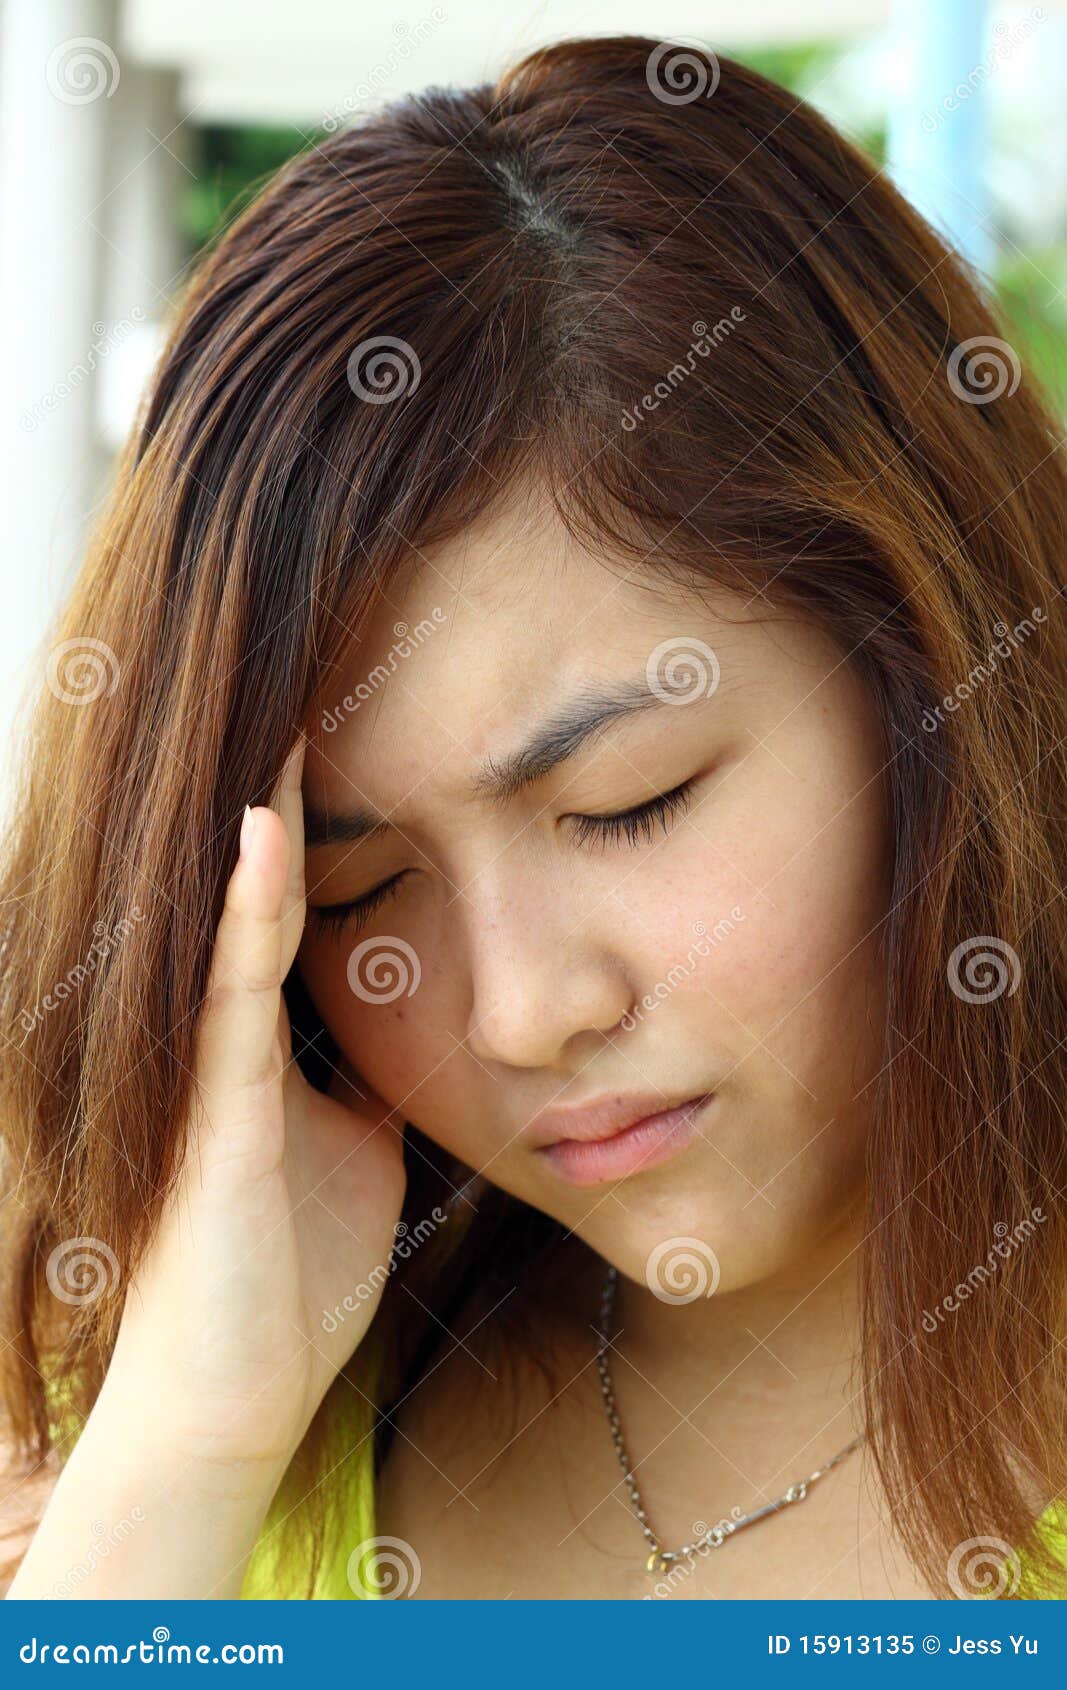 Chinese girl who is sick stock image. Image of china - 15913135